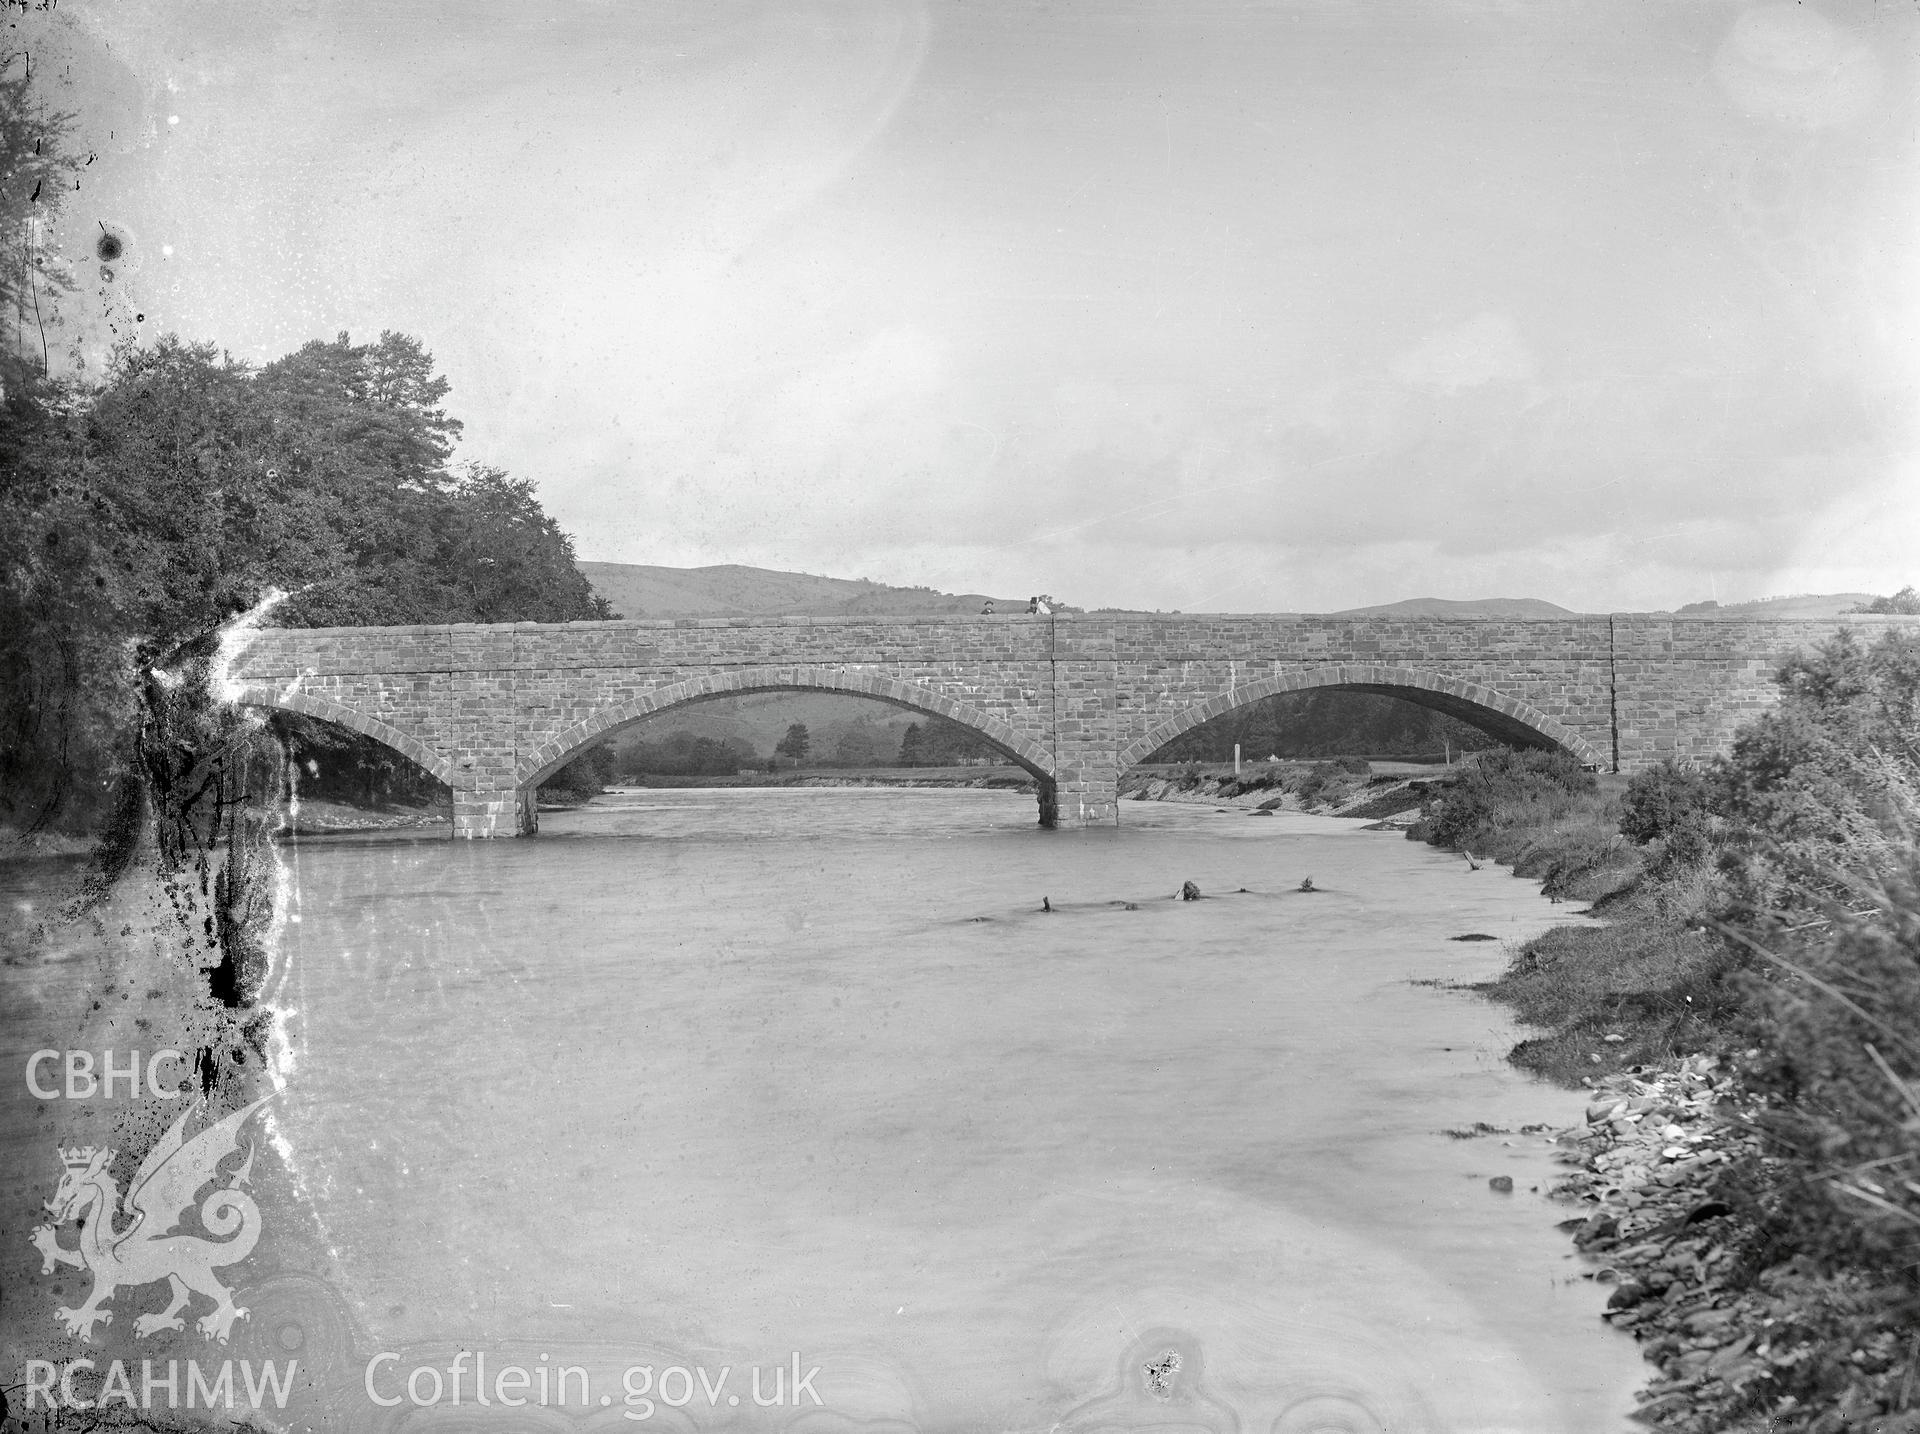 Black and white image dating from c.1910 showing an unidentified bridge, taken by Emile T. Evans.